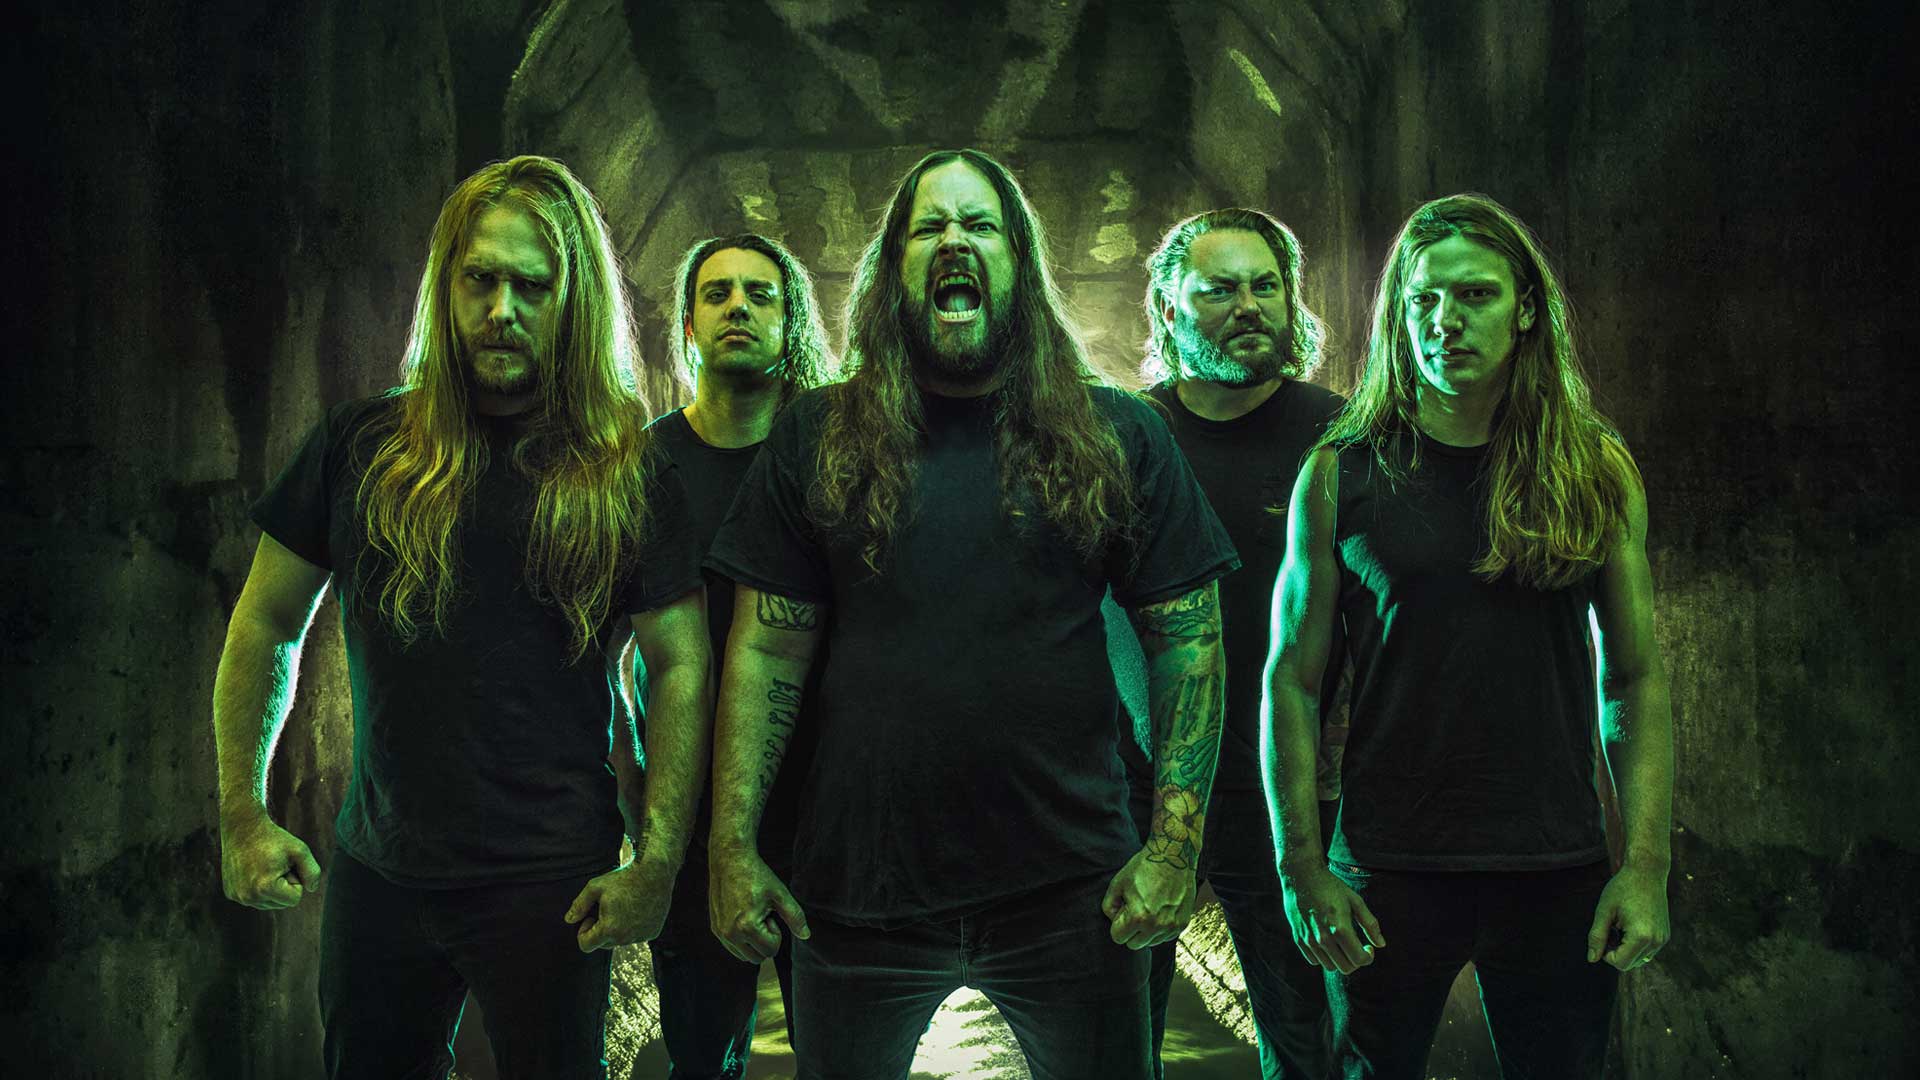 The members of The Black Dahlia Murder pose together with lead vocalist Trevor Strnad